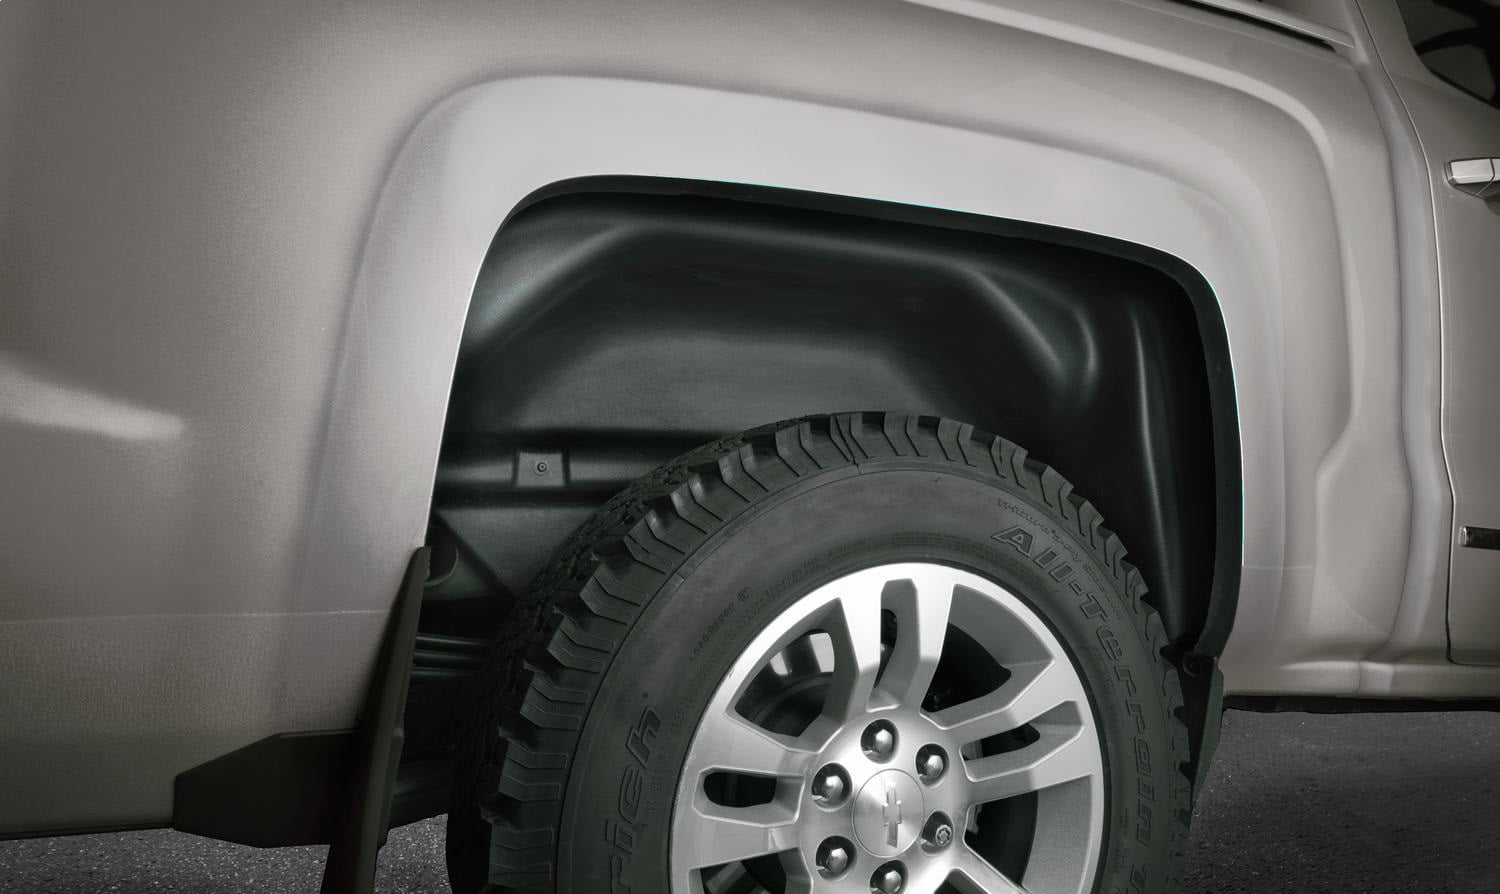 WWF25017 17-19 Ford F-250/350 Super Duty Will not fit dually or w/ 5th Wheel Rugged Liner Well Liners 